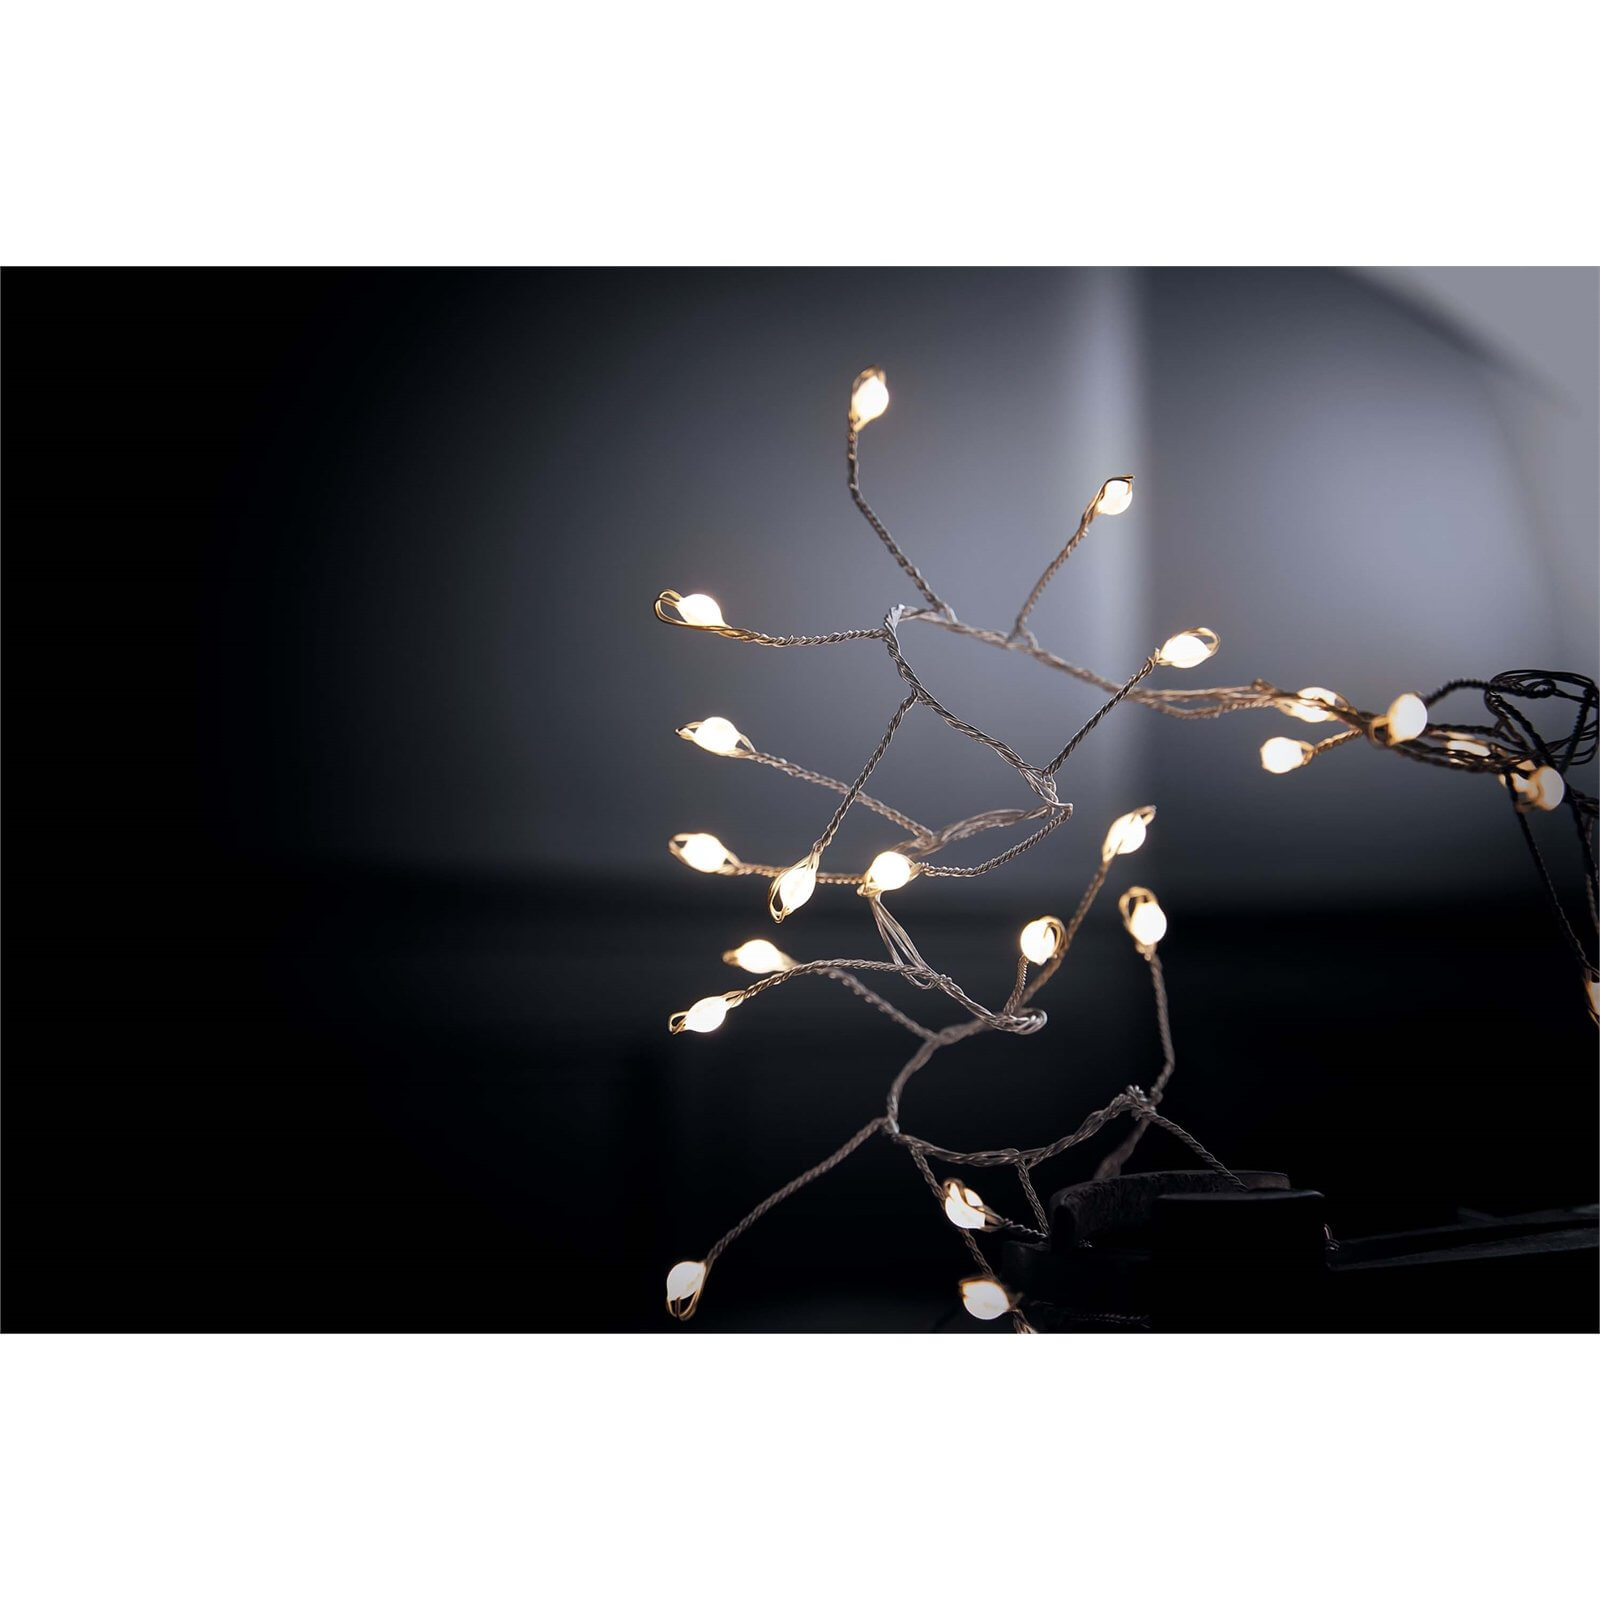 240 Large LED Silver Copper Wire Garland Christmas Lights - Warm White